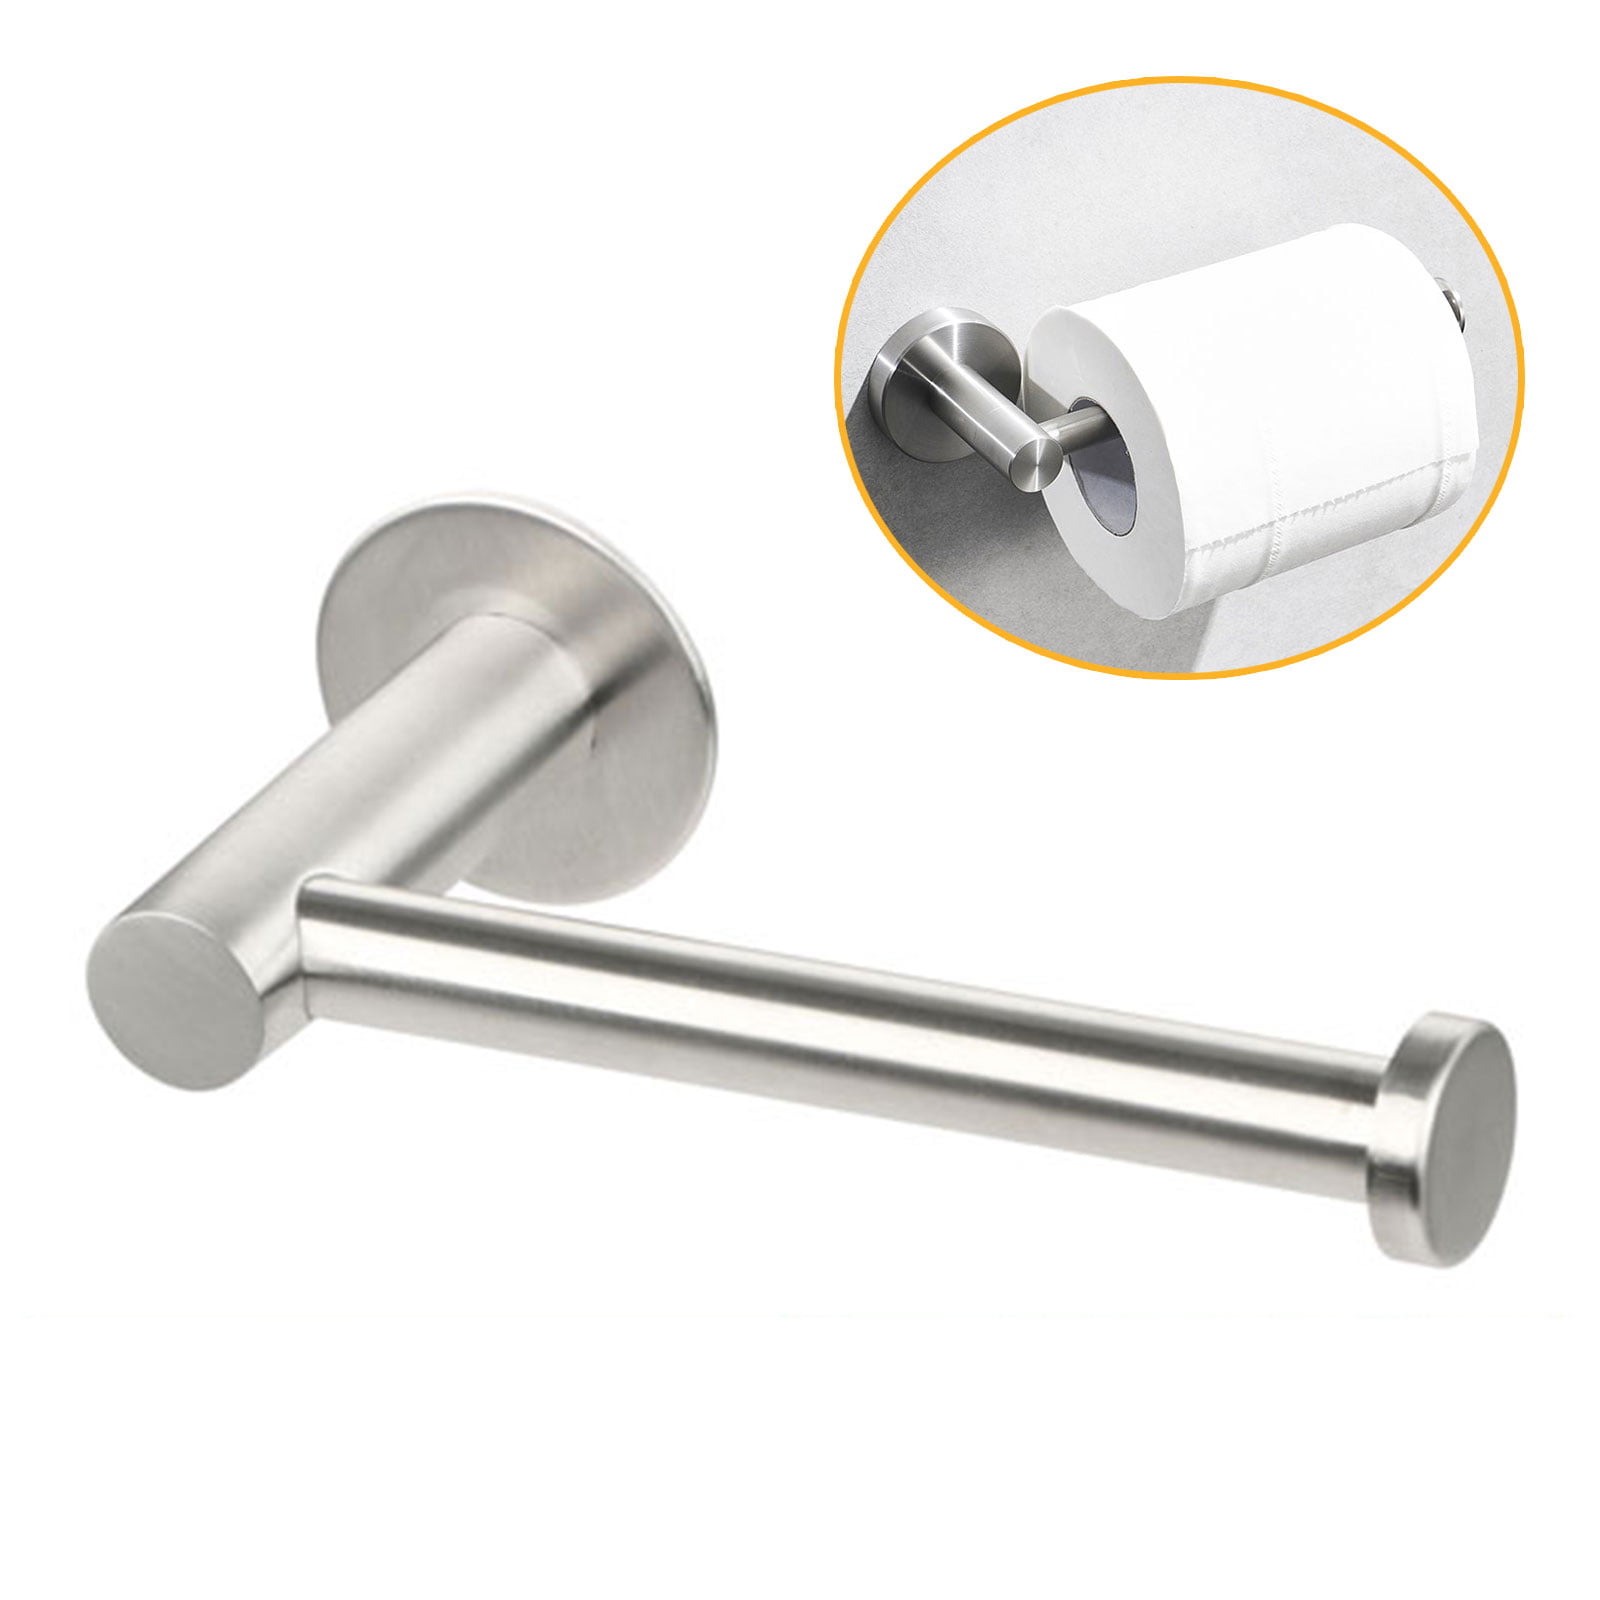 Brushed Nickel Stainless Steel 304 bathroom Toilet tissue Paper holder w/ cover 